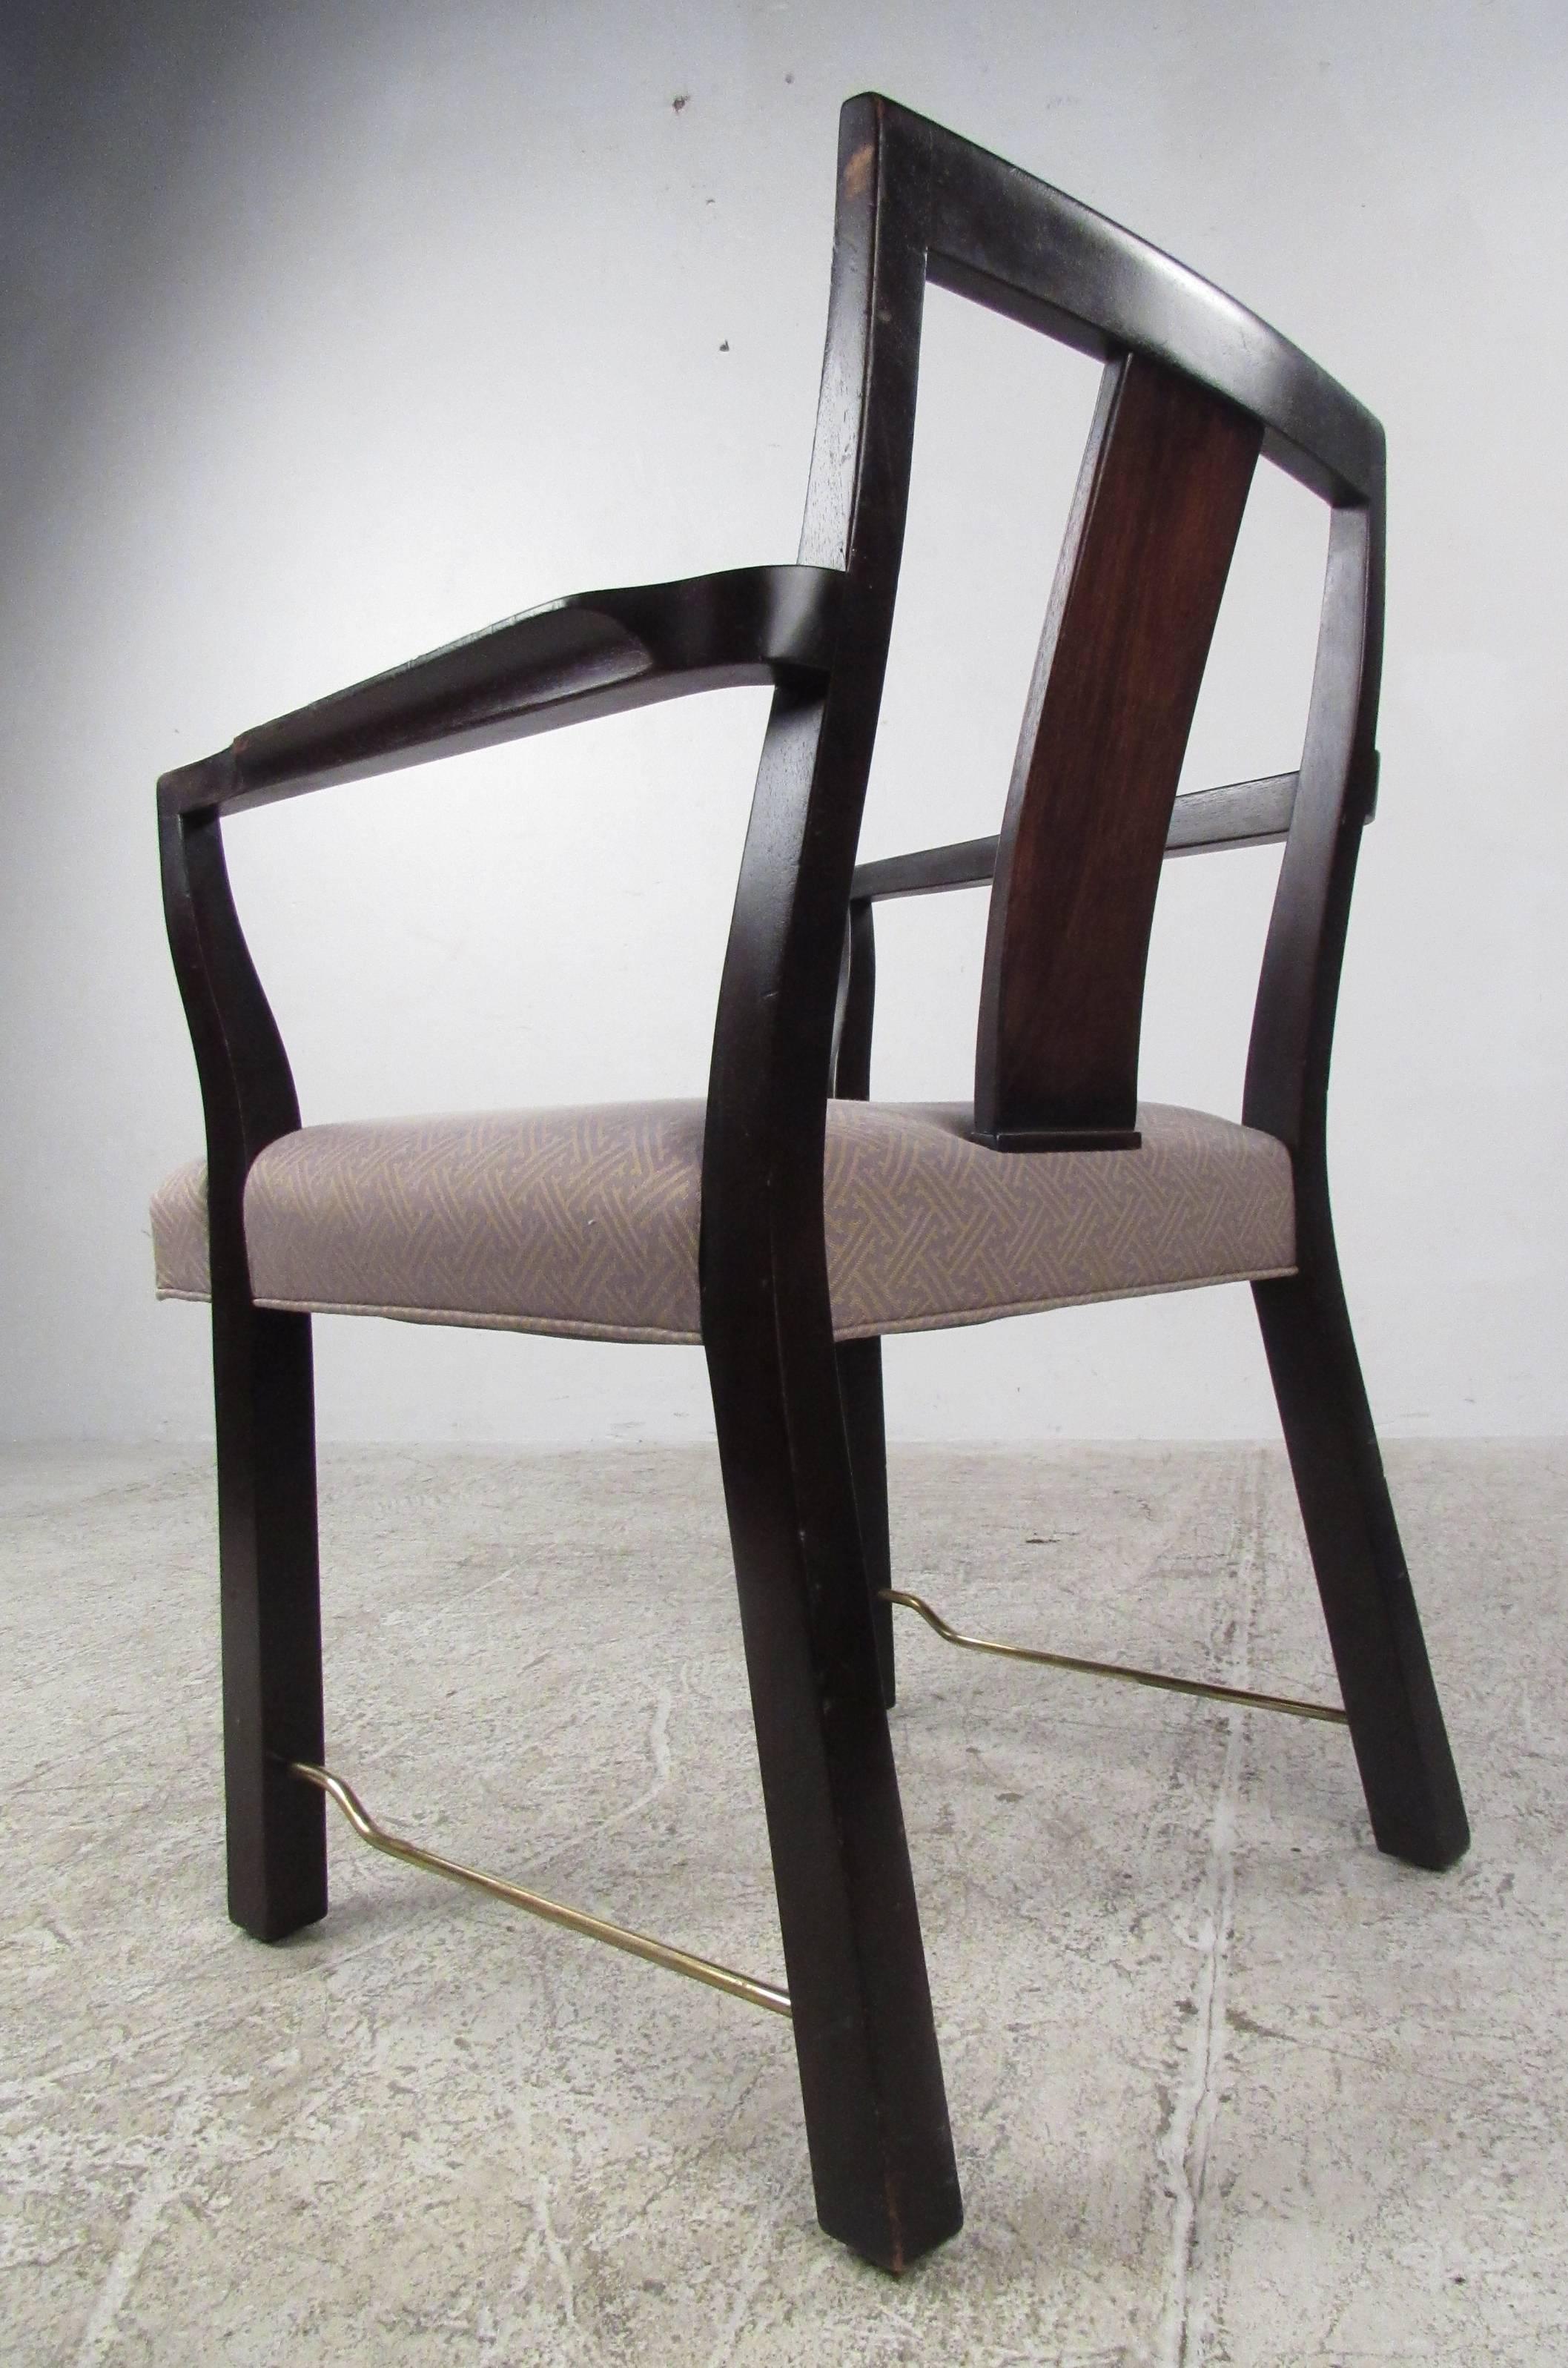 Set of six dining chairs designed by Edward Wormley for Dunbar with brass stretchers, mahogany frames and upholstered seats. Stylish and substantial mid-century modern dining room chairs make an elegant edition to any dining room setting. Please